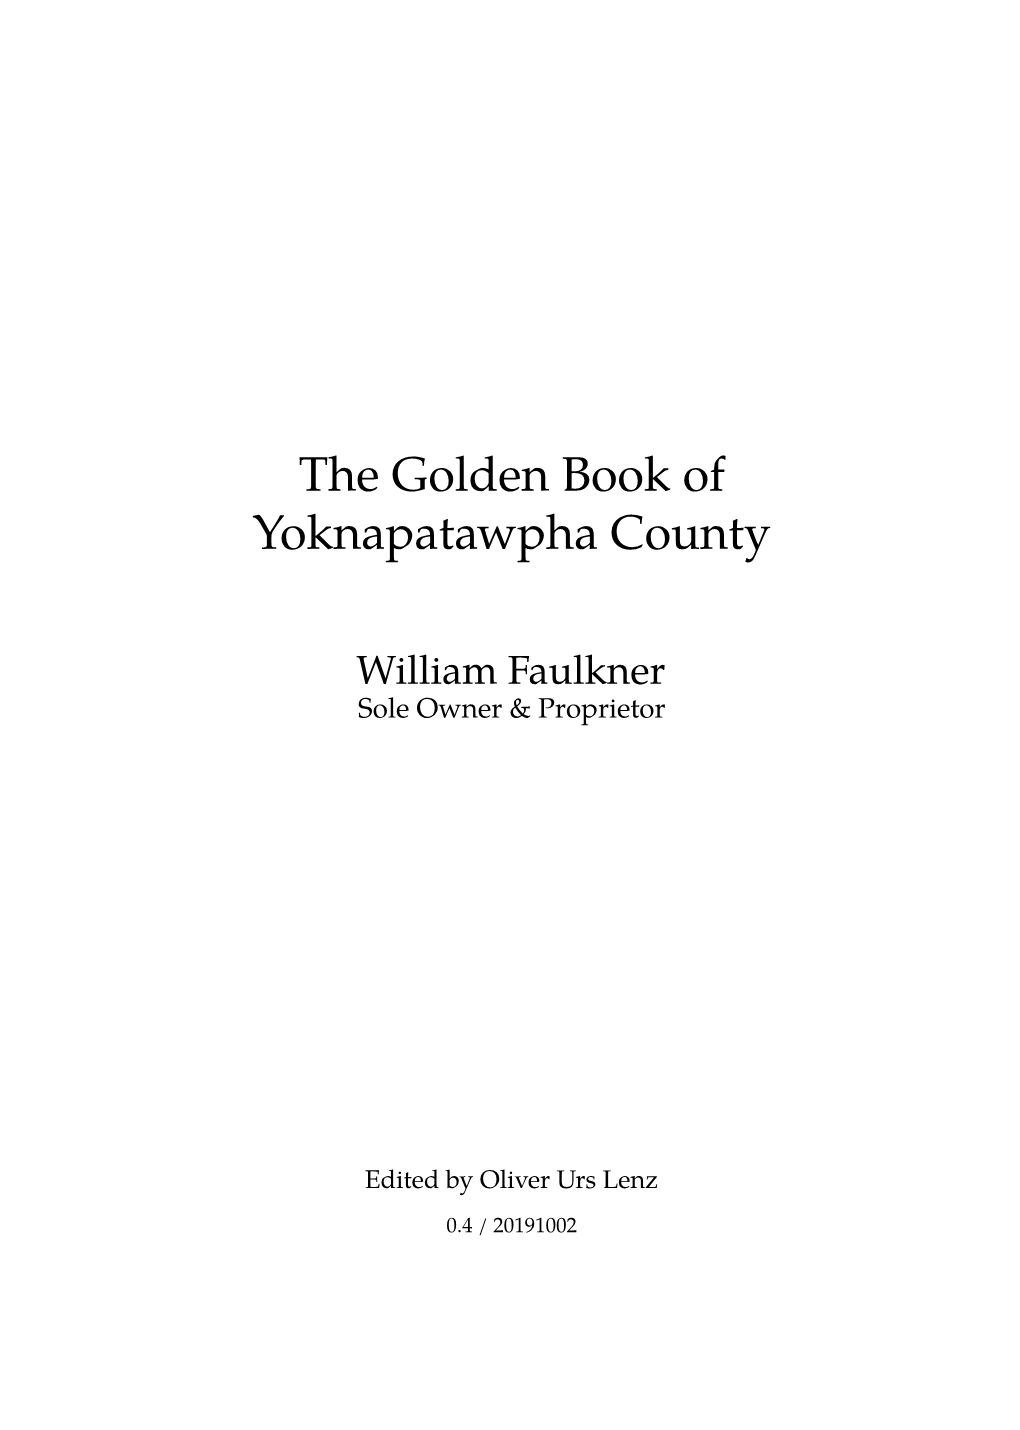 The Golden Book of Yoknapatawpha County